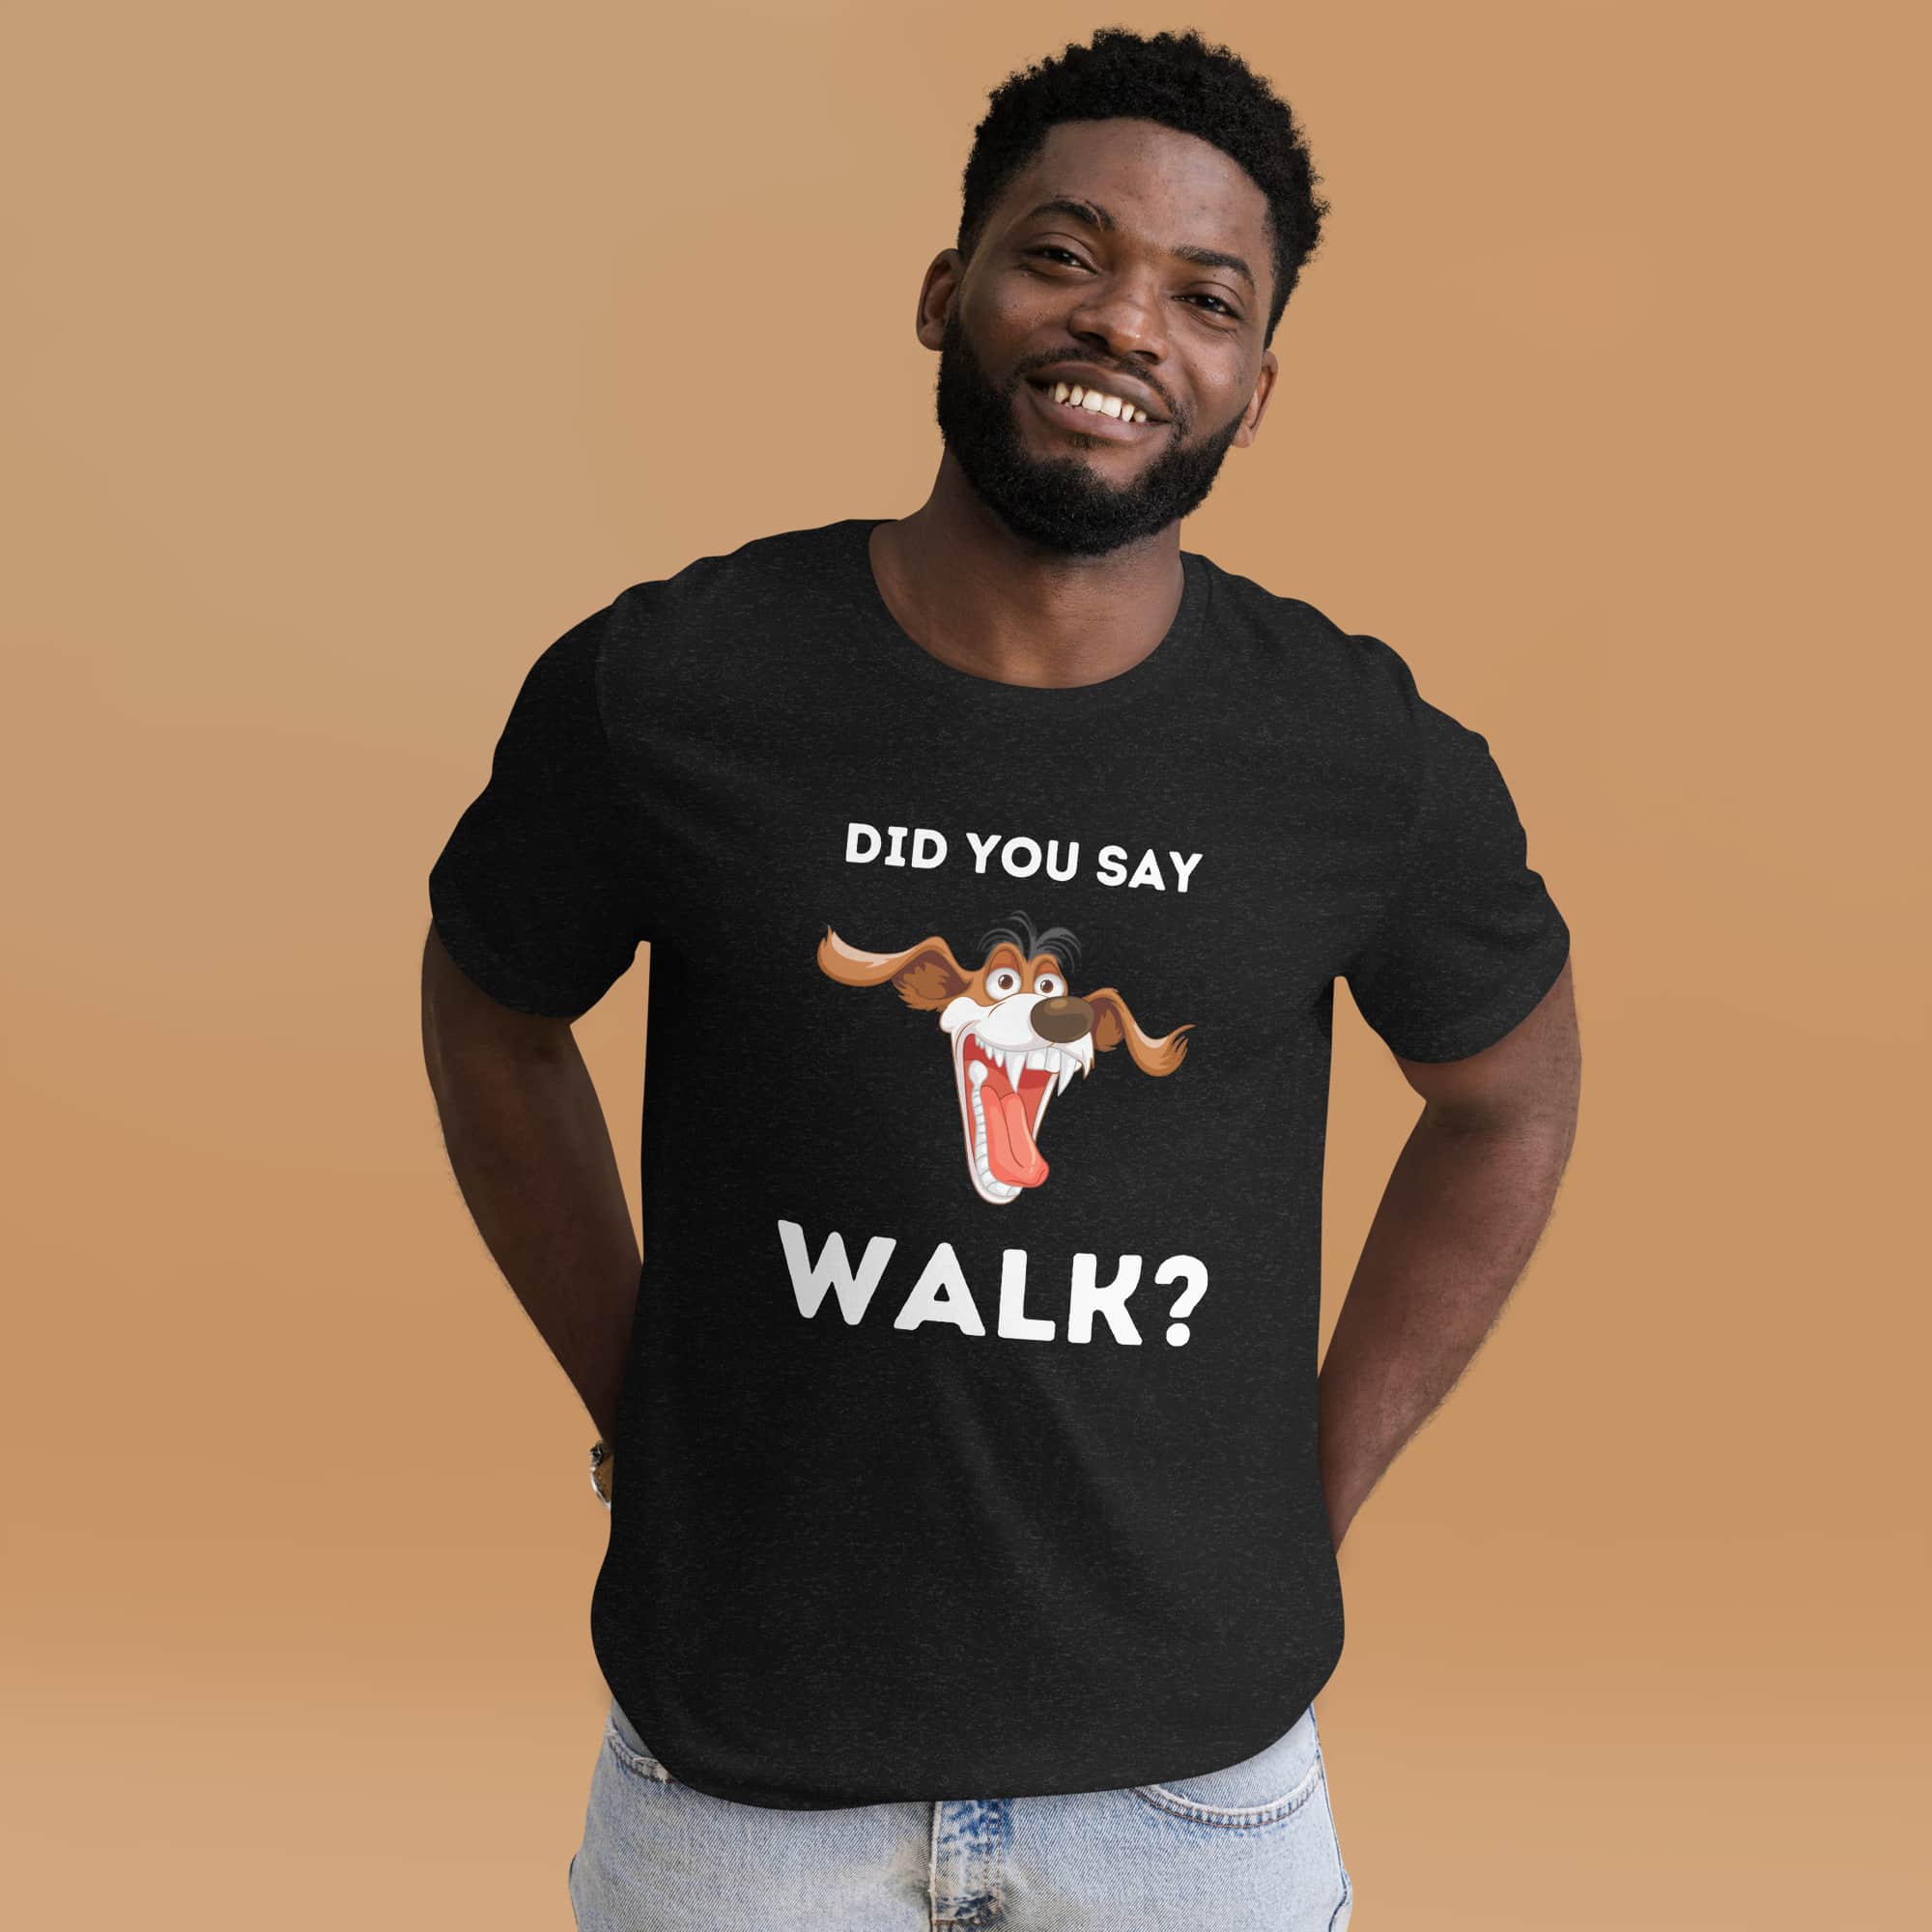 The "Funny 'Did You Say Walk?' Dog Unisex T-Shirt" captures the excitement dogs feel at the mention of a walk. Made from a comfortable, durable blend, it features a vibrant graphic that dog lovers will relate to. Available in various sizes and colors, it's perfect for casual wear, highlighting a universal moment in dog ownership with humor and style. Black Heather. male